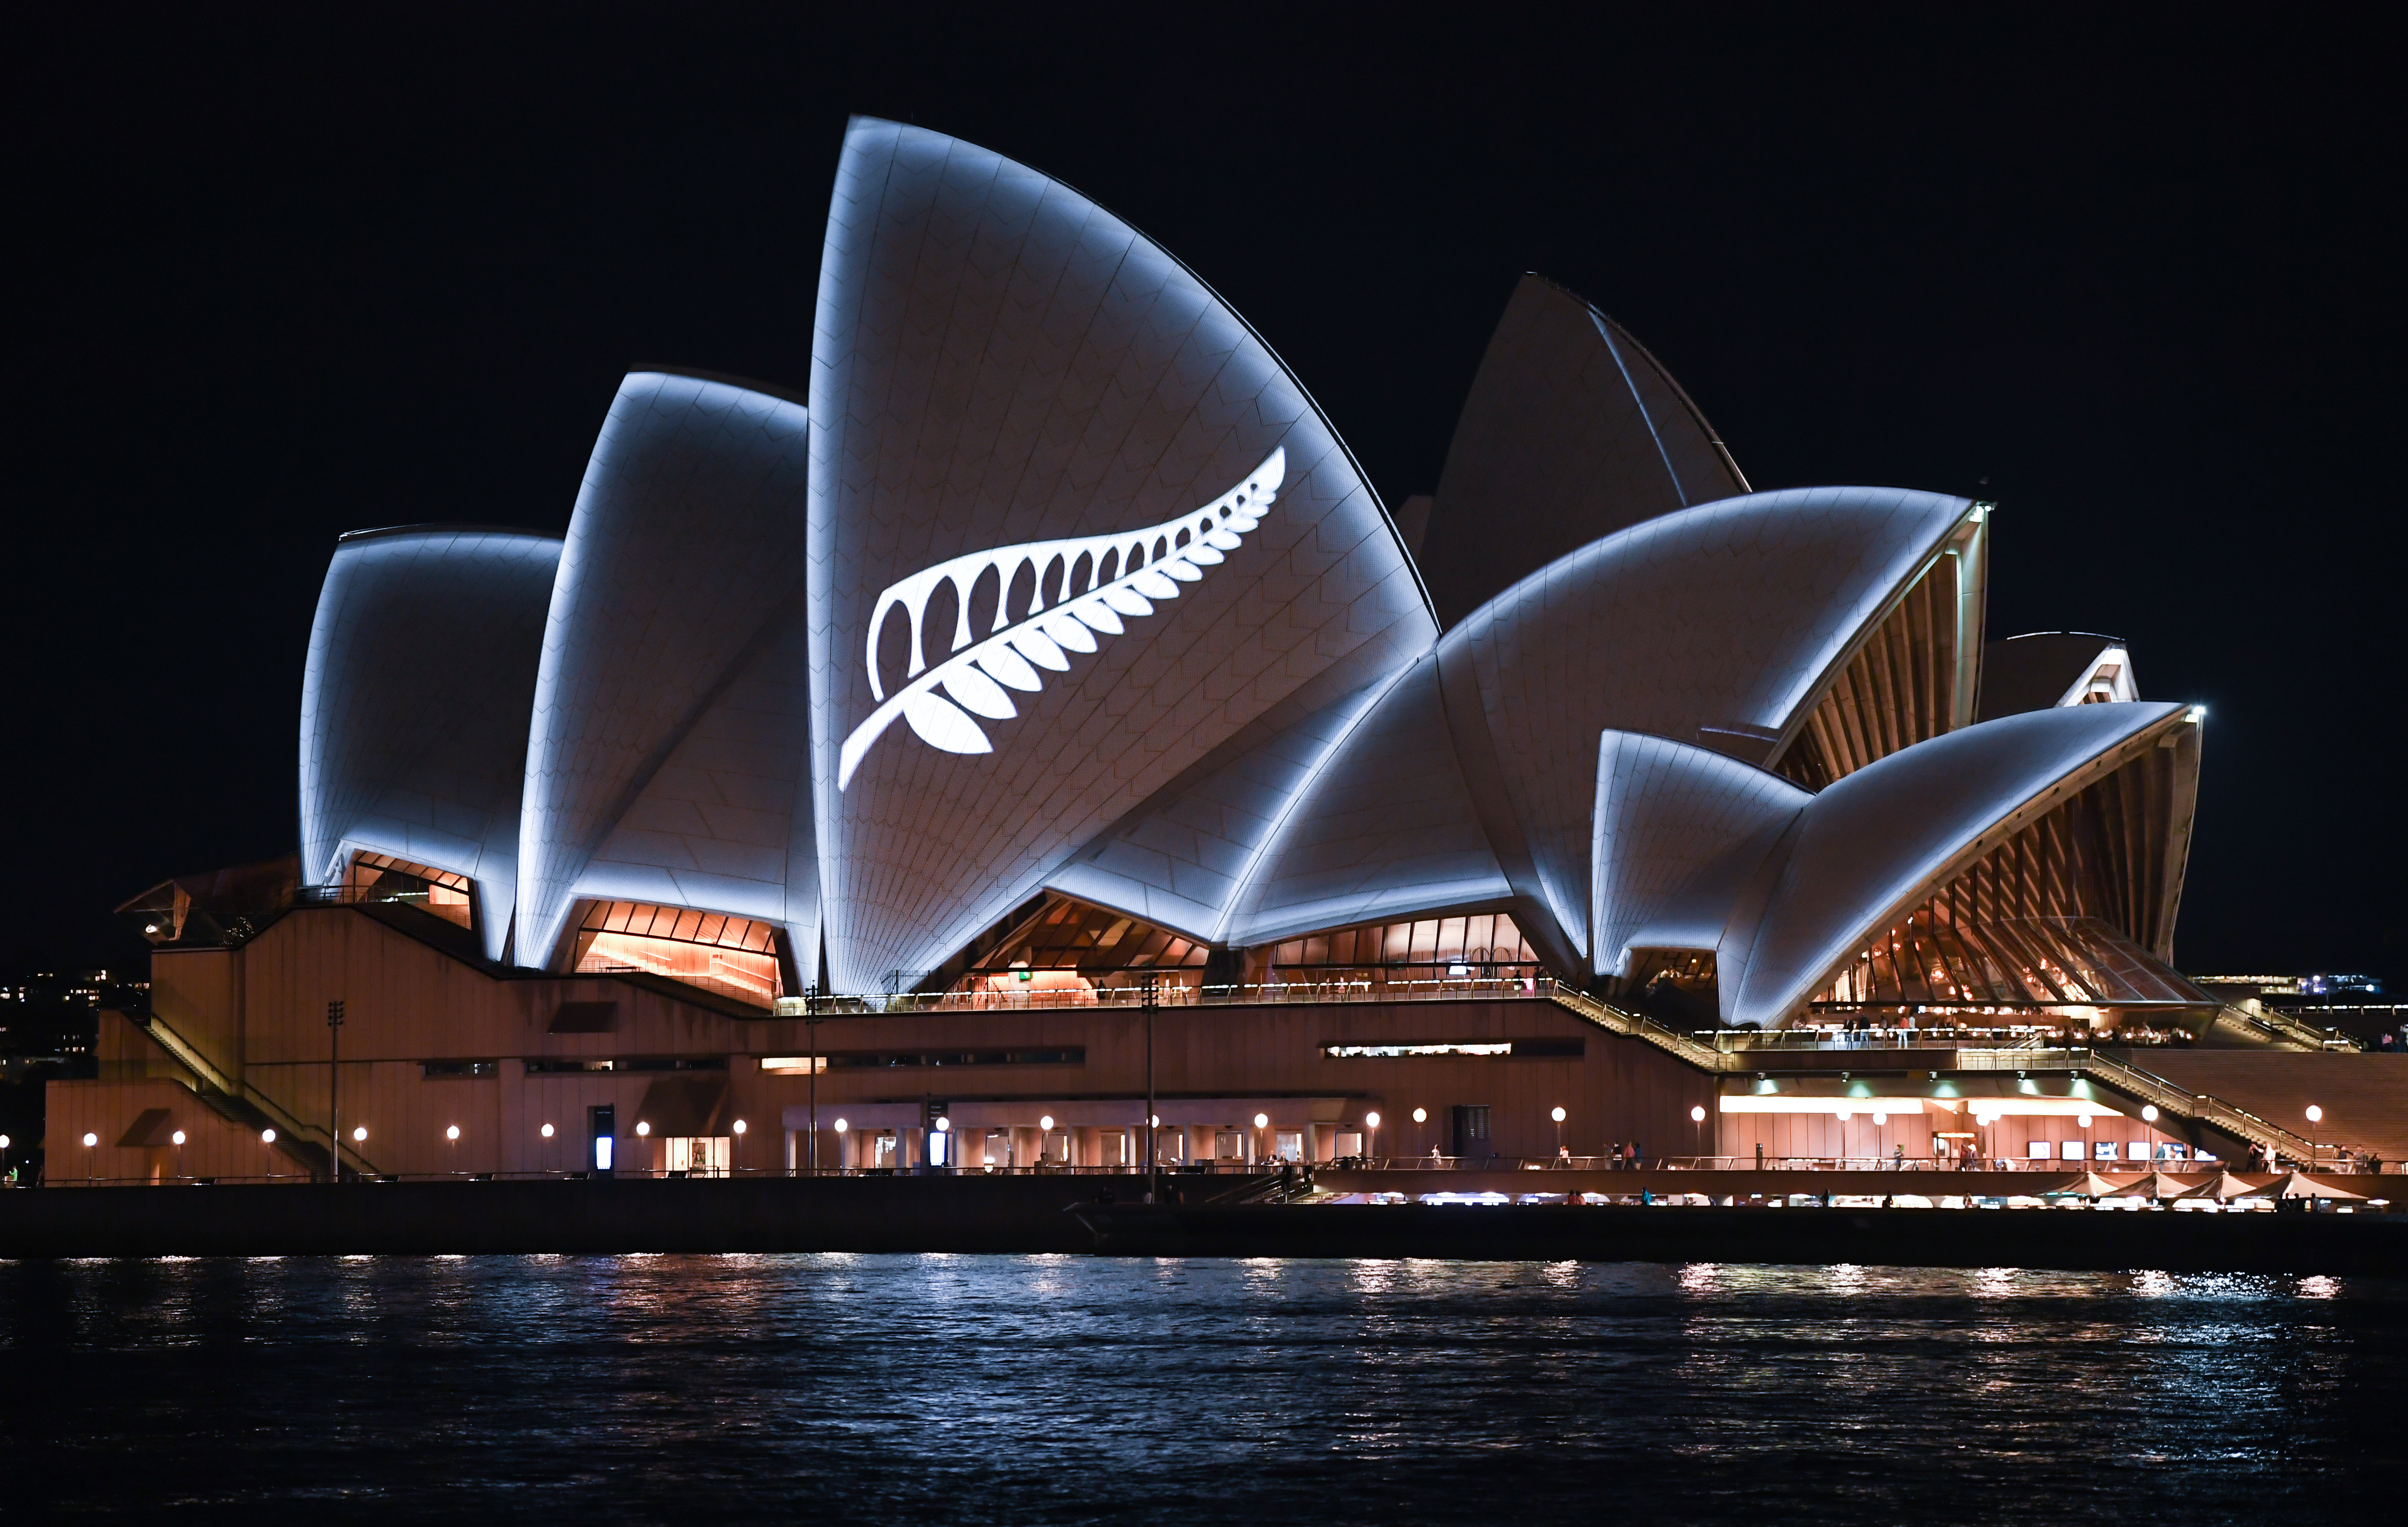 A silver fern is projected onto the sails of Sydney Opera House in commemoration of the victims of the Christchurch massacre